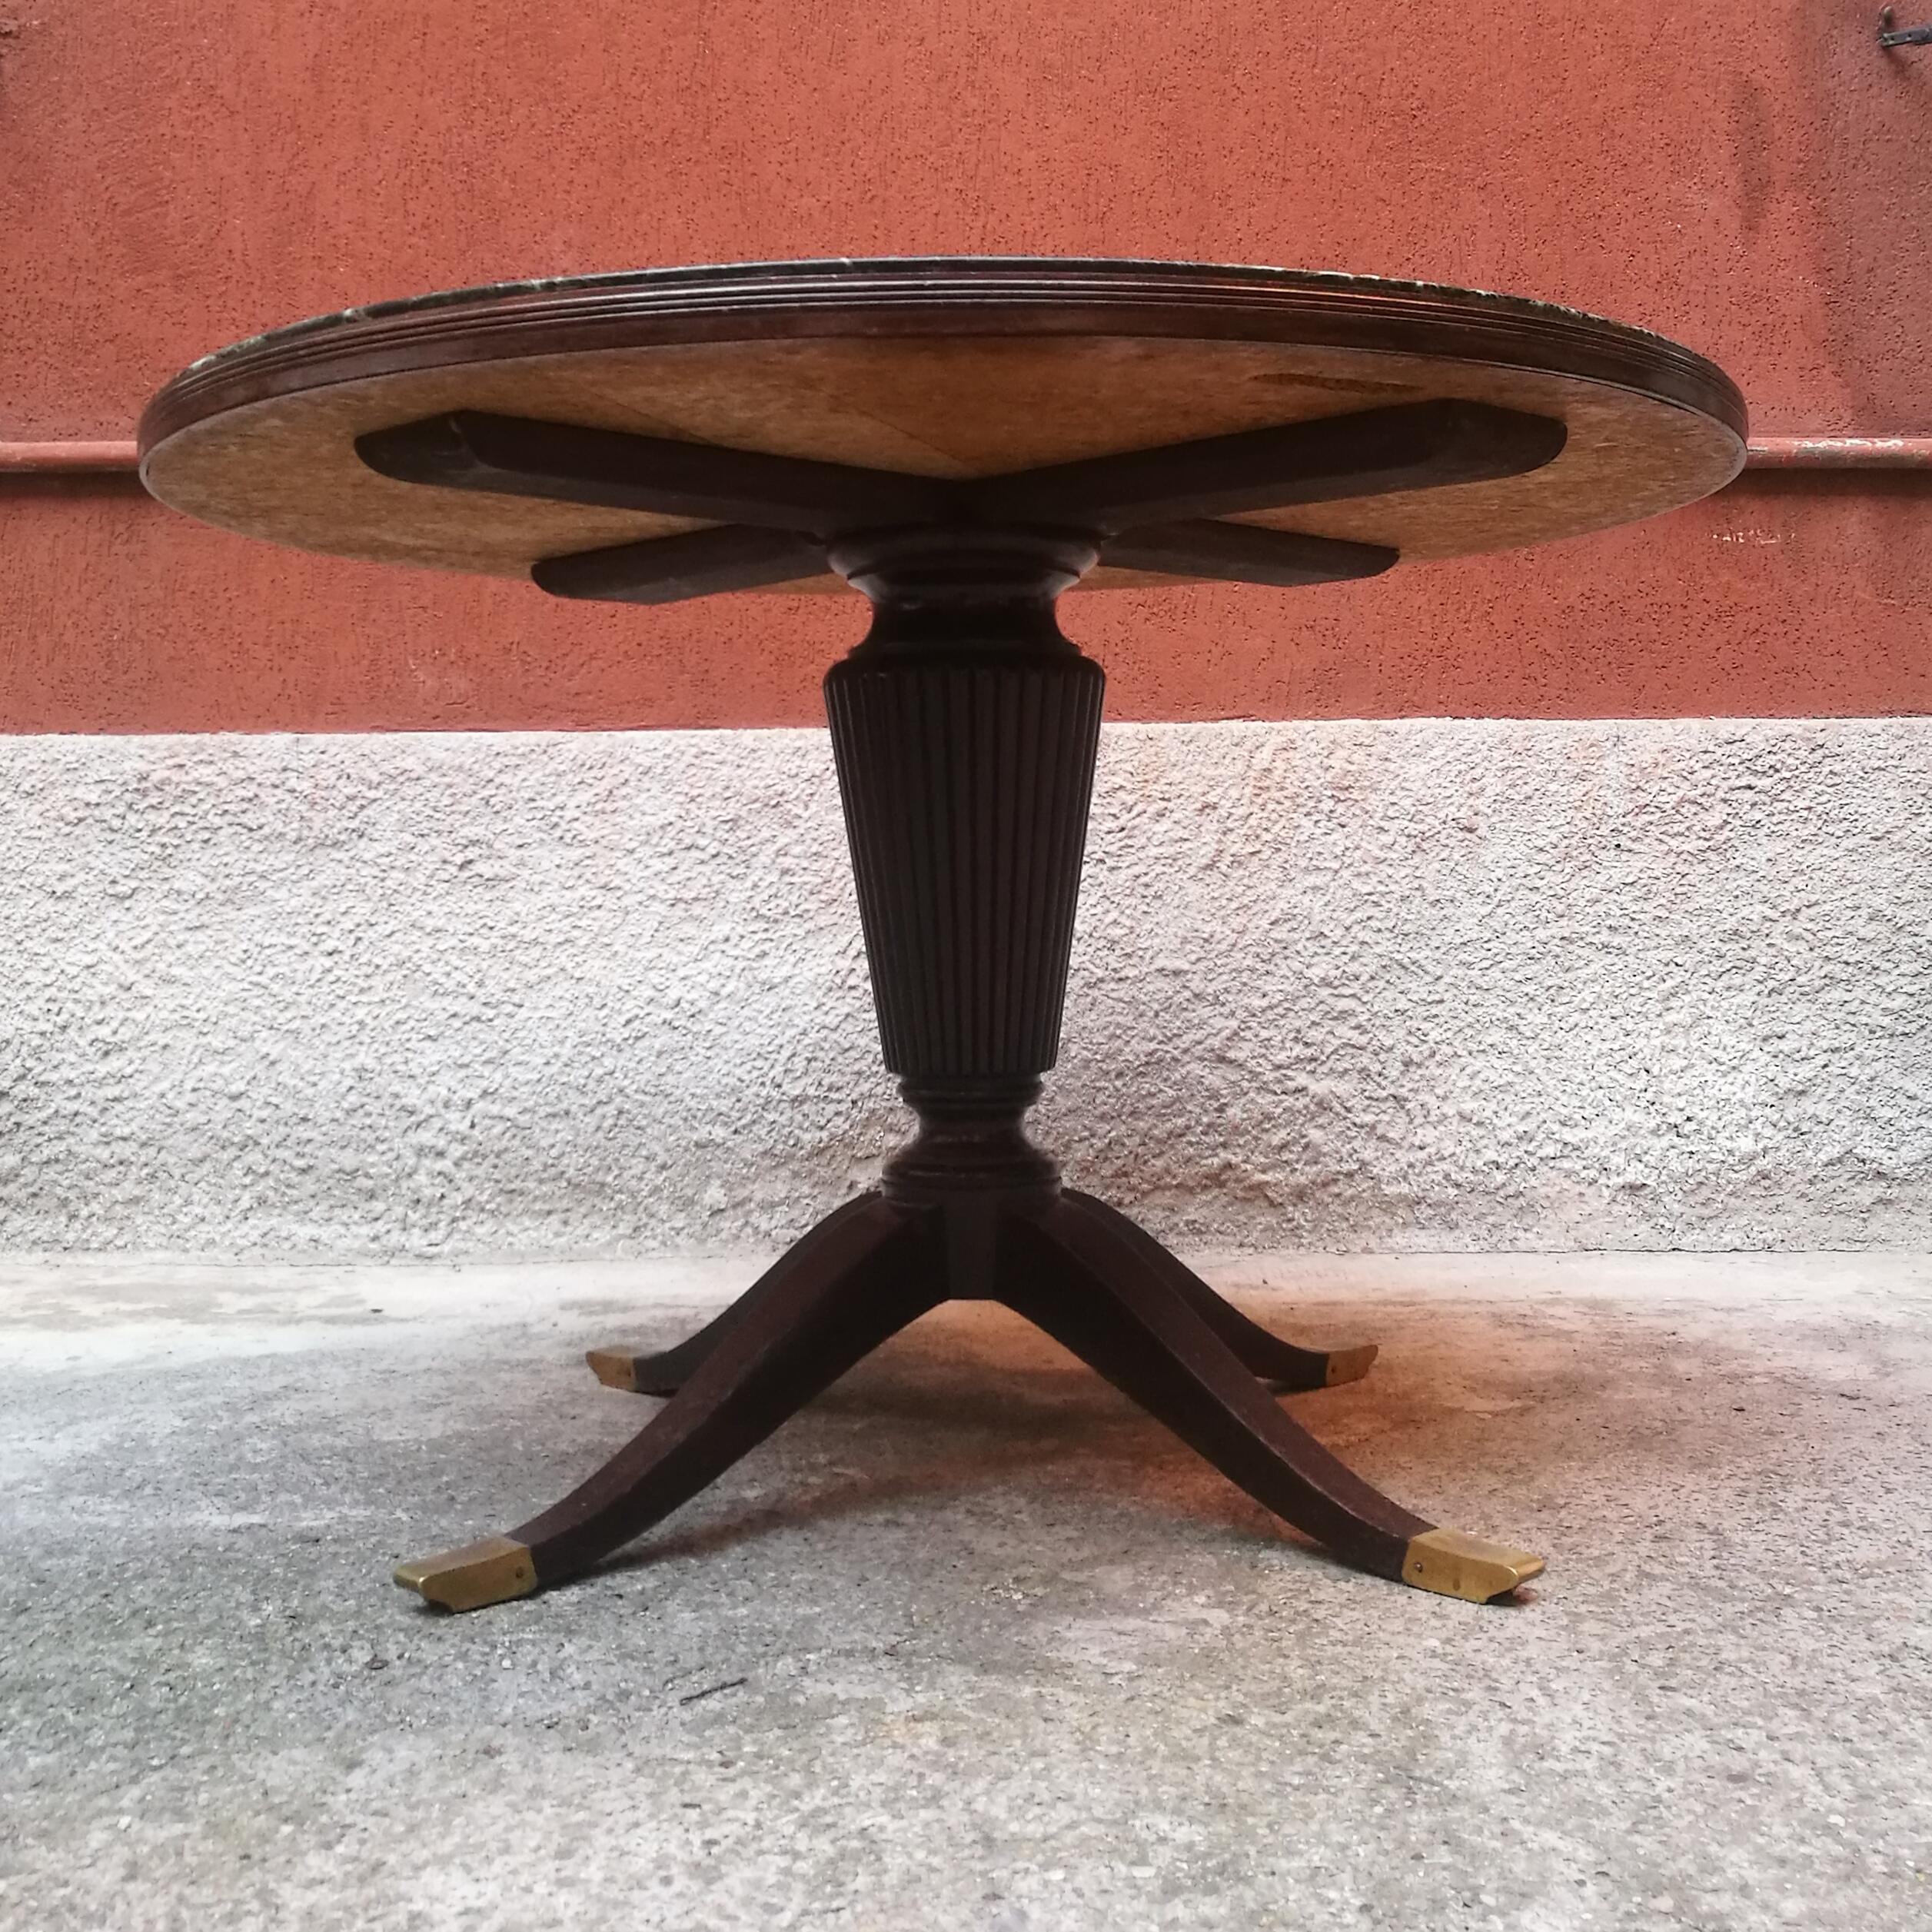 Italian round dining table with green marble, 1950s
Round dining table made in Italy from fifties. A wooden four-legs structure, with brass tips and a central turned column, where is placed a marble top encased in a decorative frame. This is a